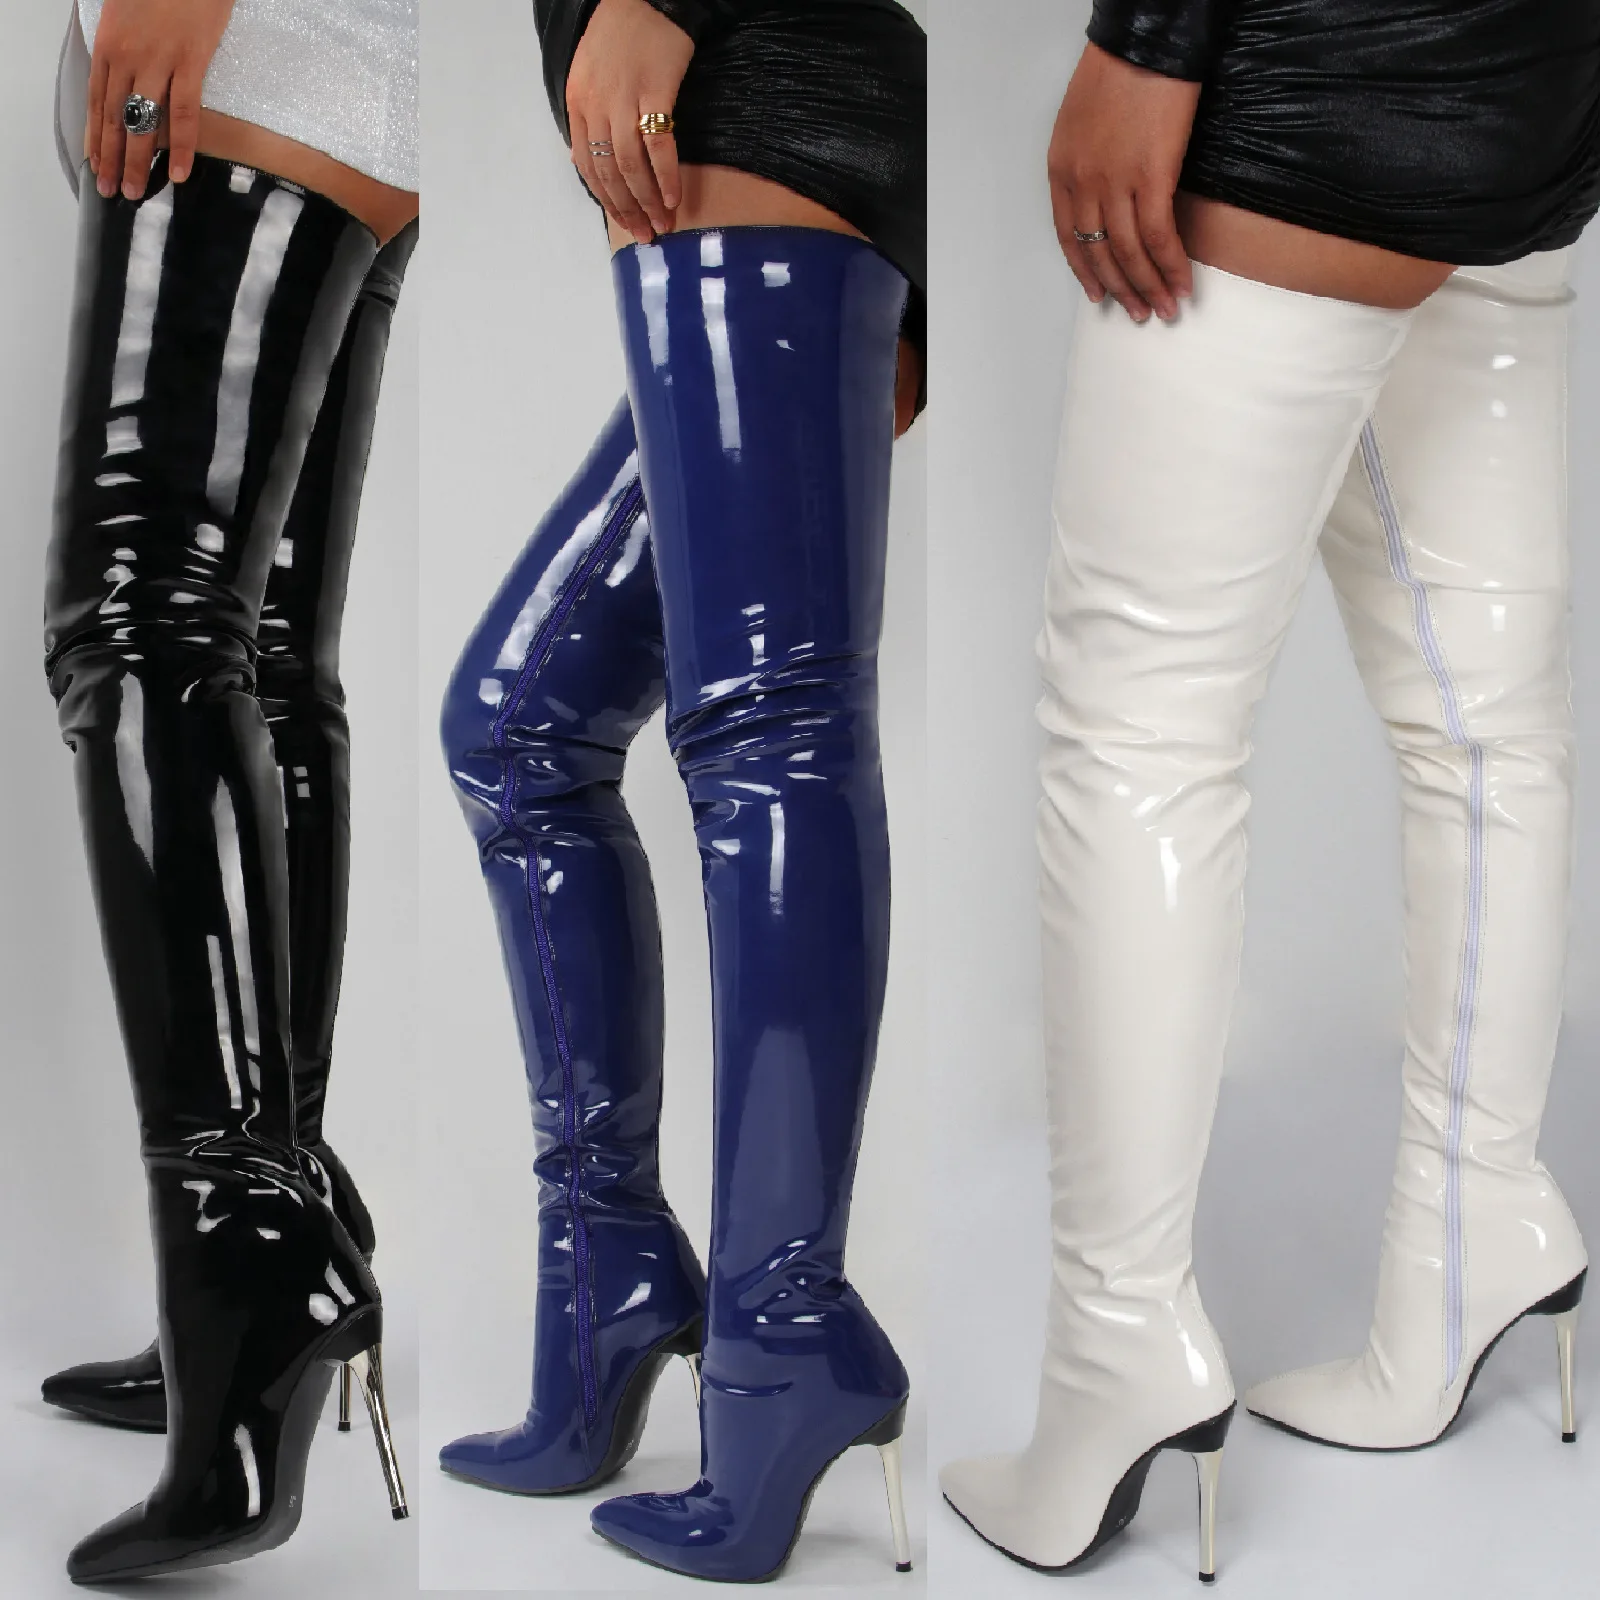 sexy-pointed-side-zipper-patent-leather-stiletto-high-heel-over-the-knee-boots-large-size-leather-boots-women